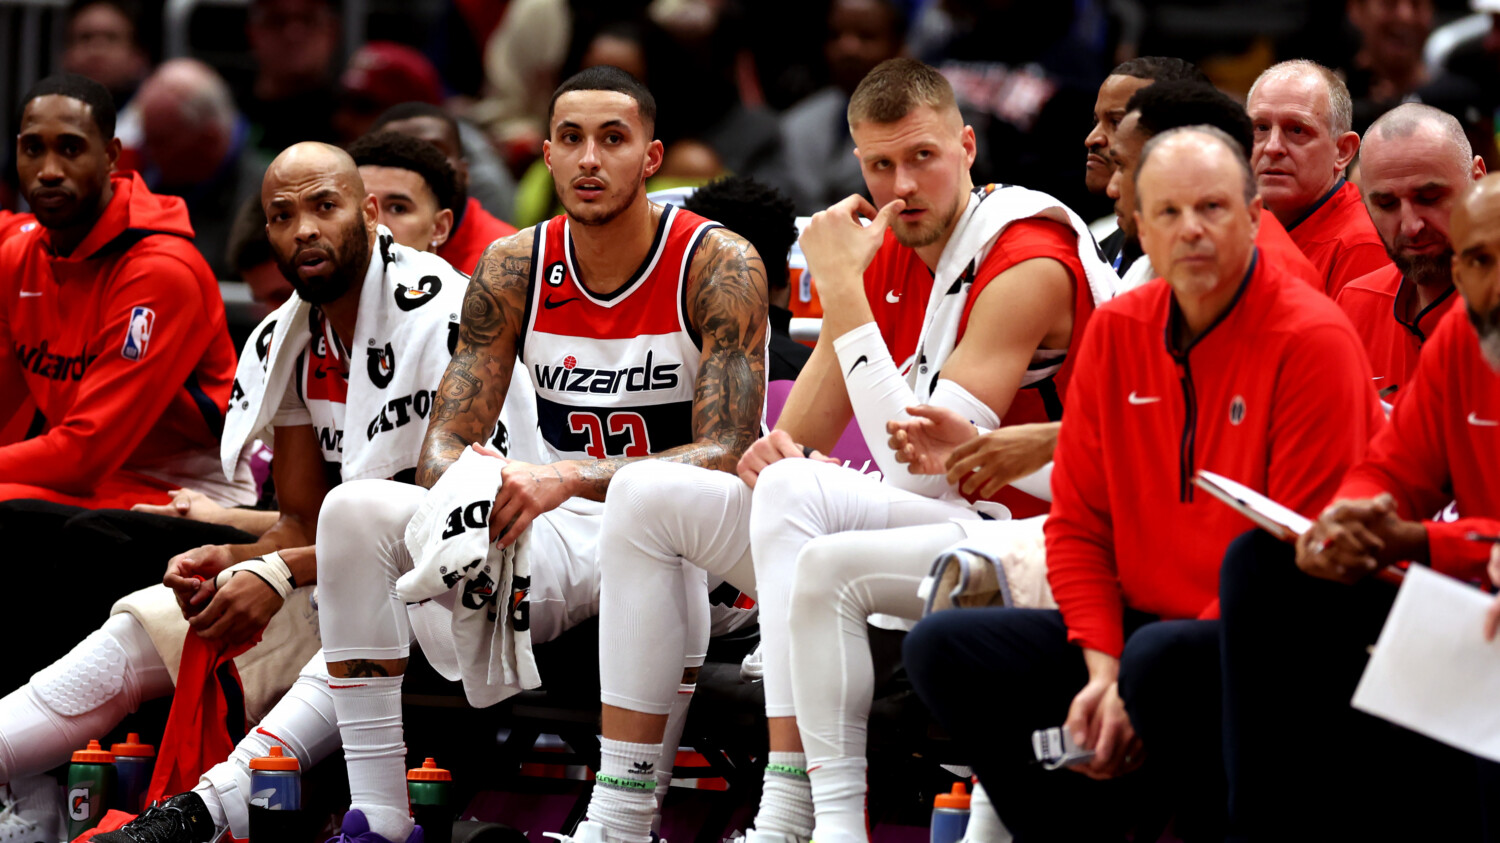 Kuzma, Wizards Are NBA's First to Reveal 2022-23 City Edition Jerseys